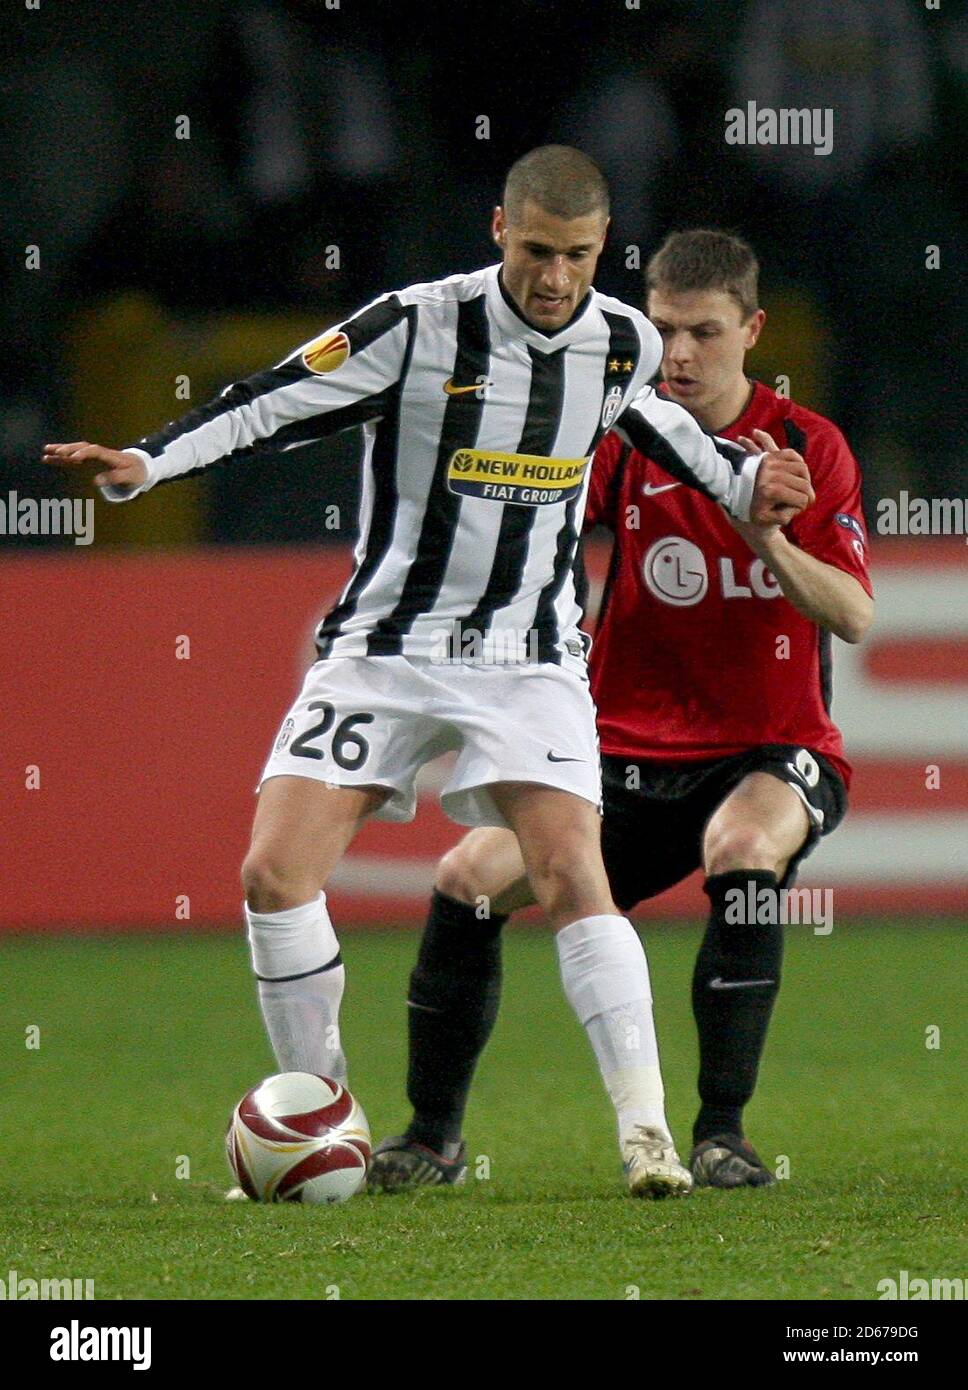 Juventus' Antonio Candreva (left) and Fulham's Chris baird (right) battle for the ball Stock Photo